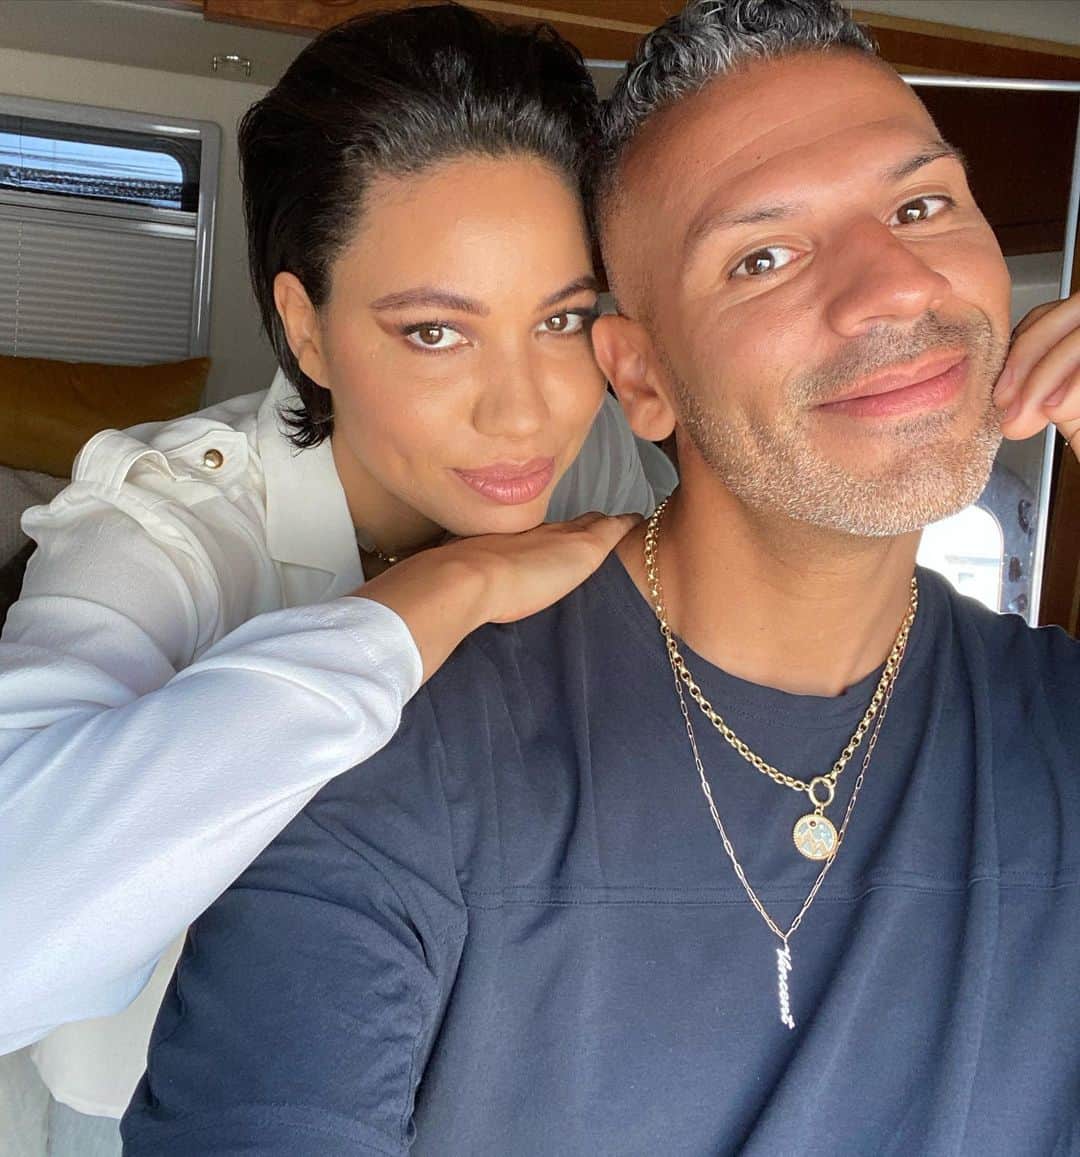 Vincent Oquendoのインスタグラム：「And that’s a wrap. Thank you so much to the amazing crew on spiderhead that made working on  my first feature film so painless and amazing. I will have this forever and thank you to my angel #jurneesmollett for always having my back and being the ultimate muse! Can’t wait for you all to see what we created 💋」